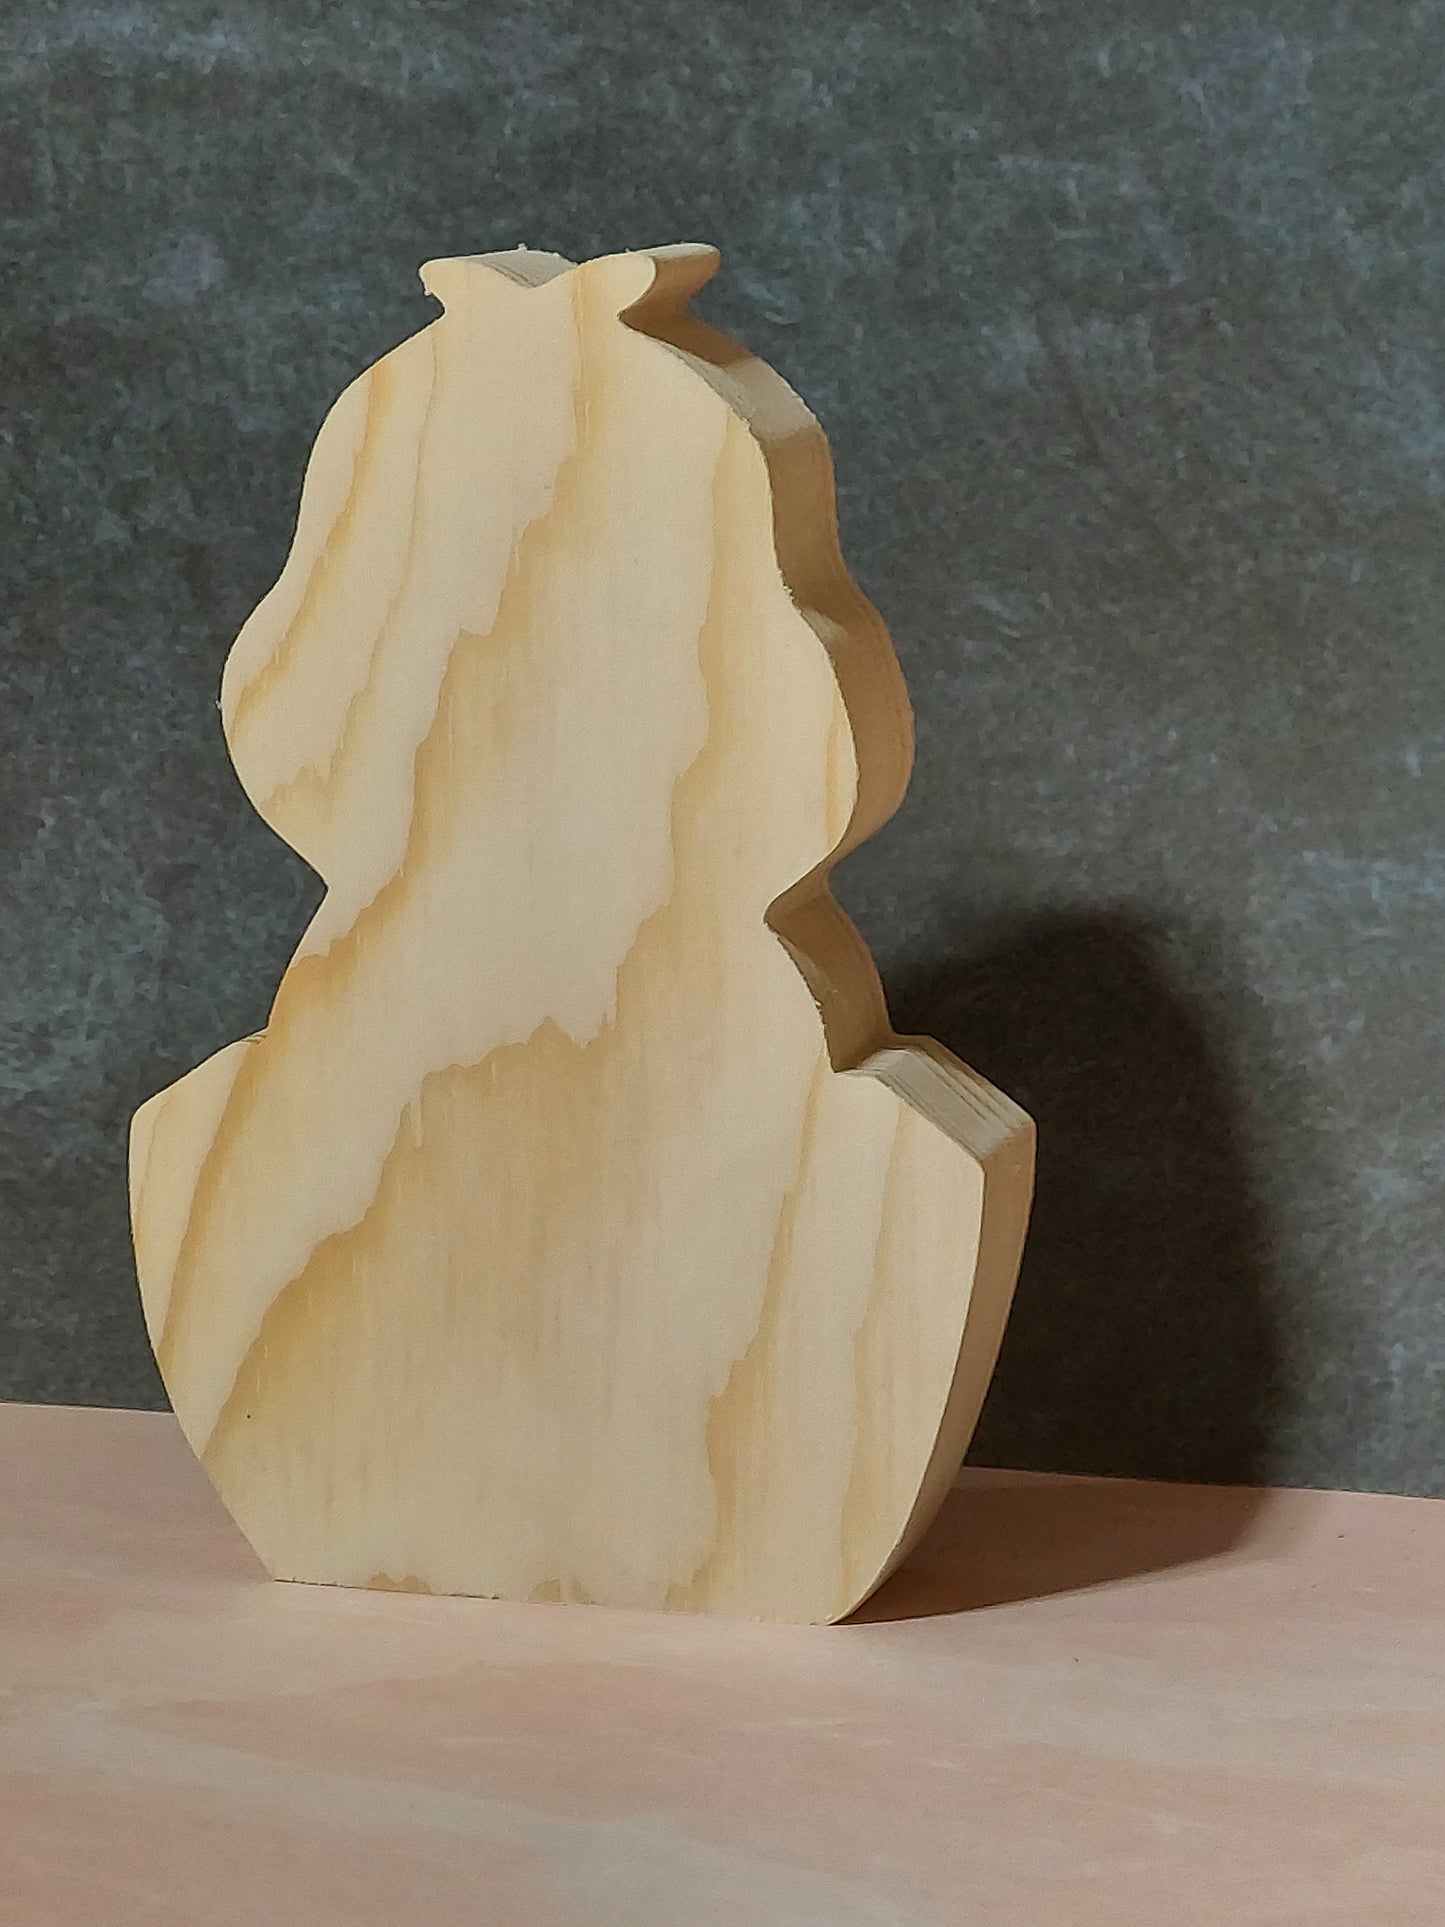 Unfinished Wooden Easter Chick Cutout